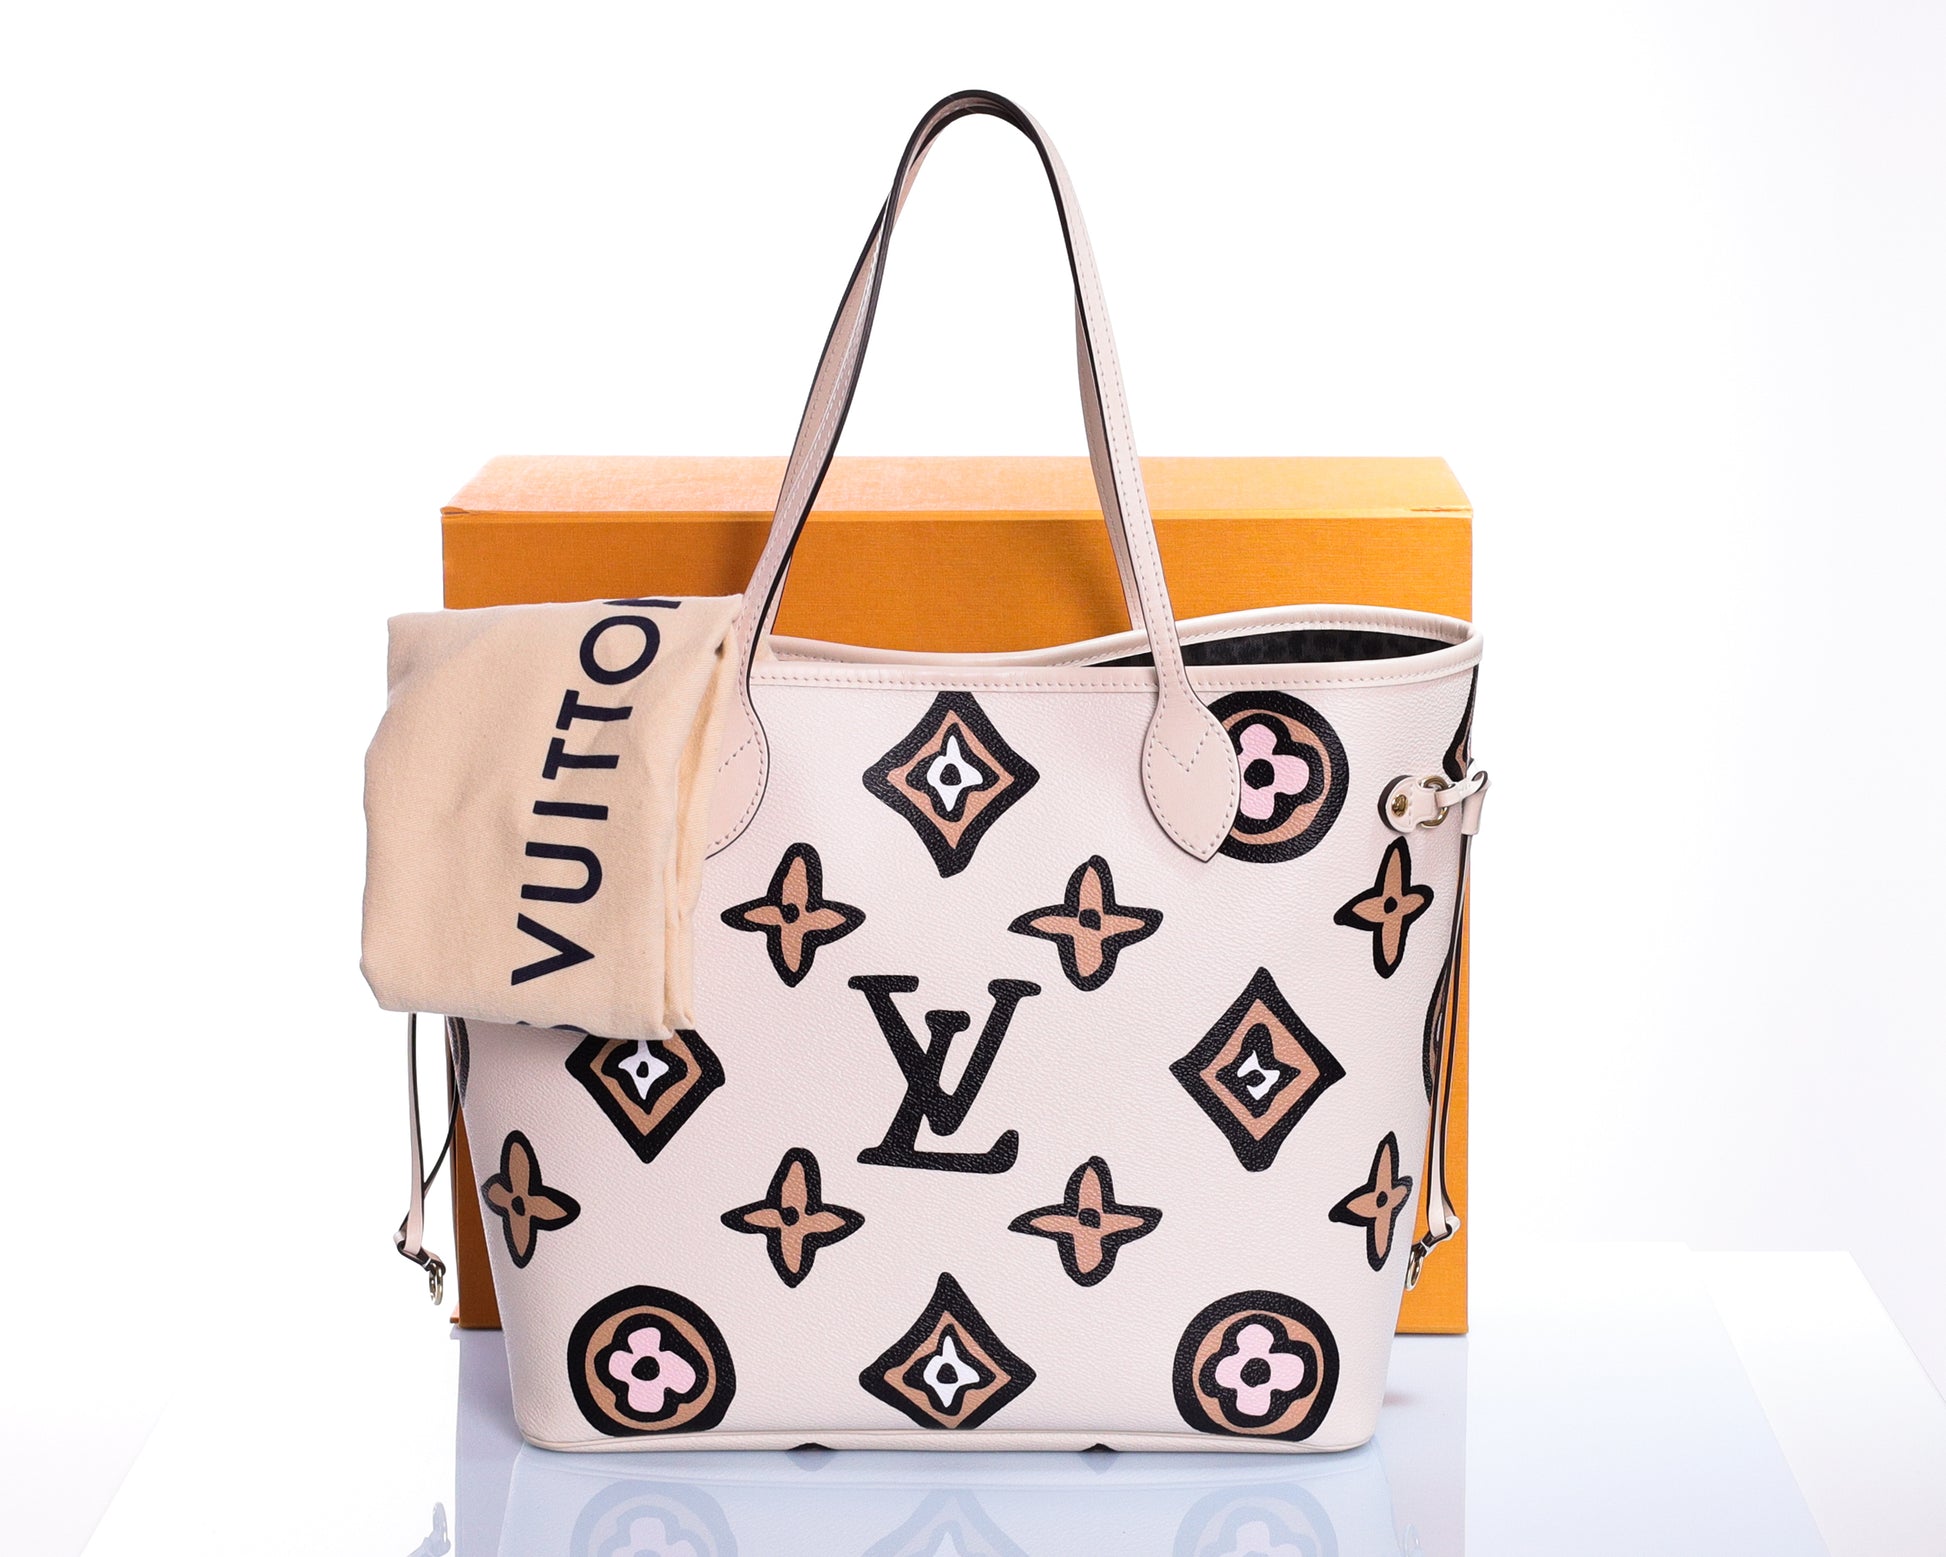 LOUIS VUITTON Neverfull MM Wild at Heart M45819 White